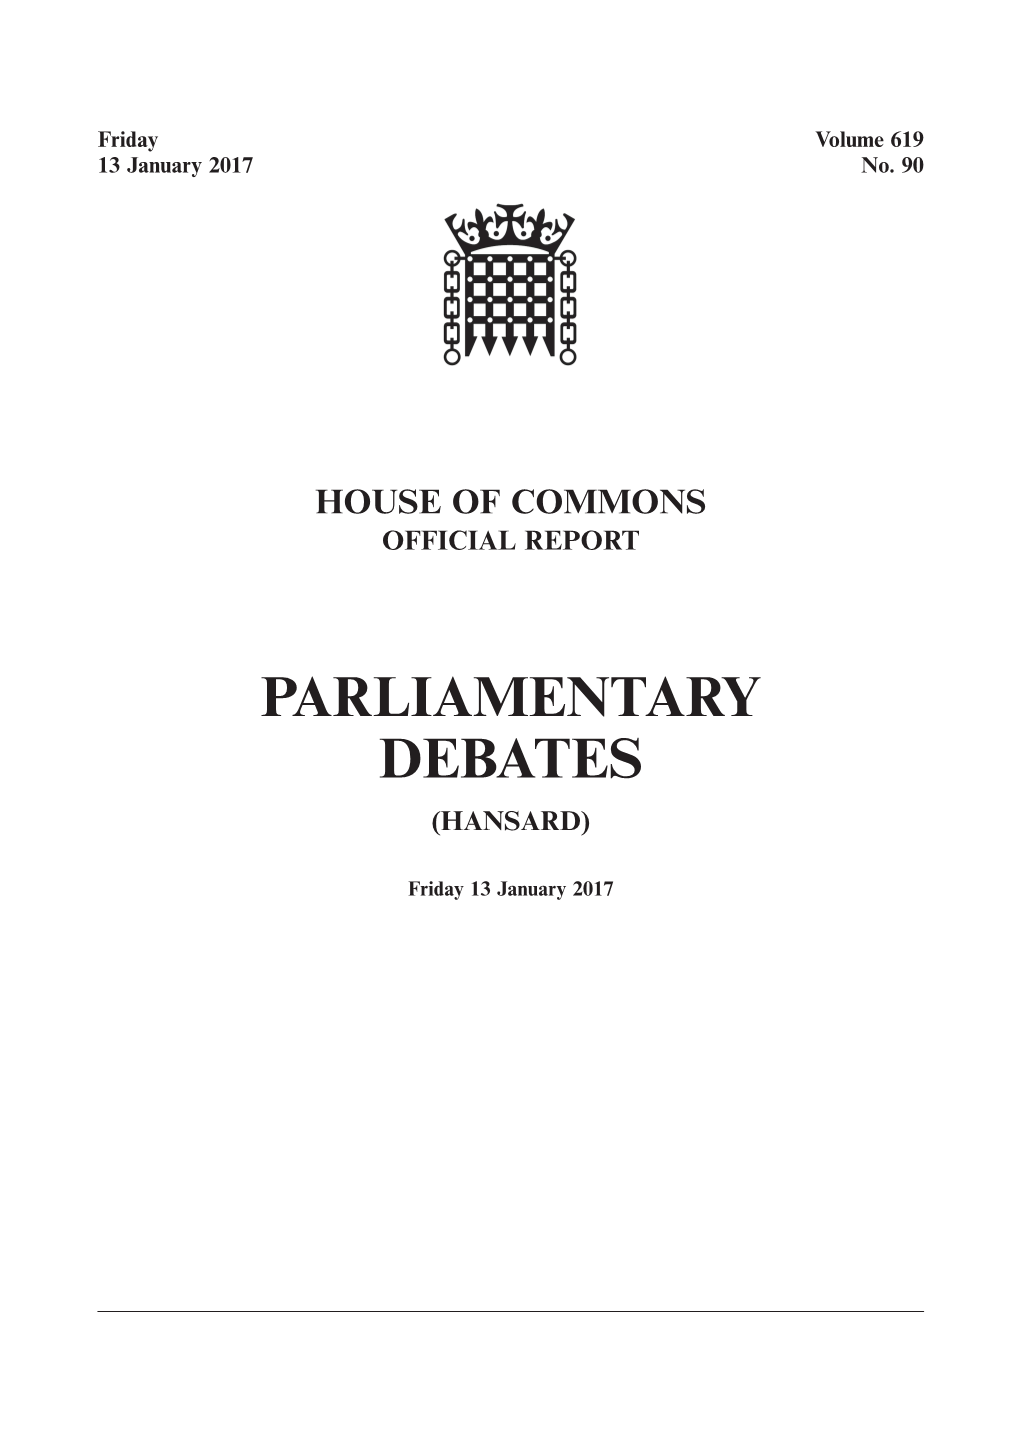 Whole Day Download the Hansard Record of the Entire Day in PDF Format. PDF File, 0.51